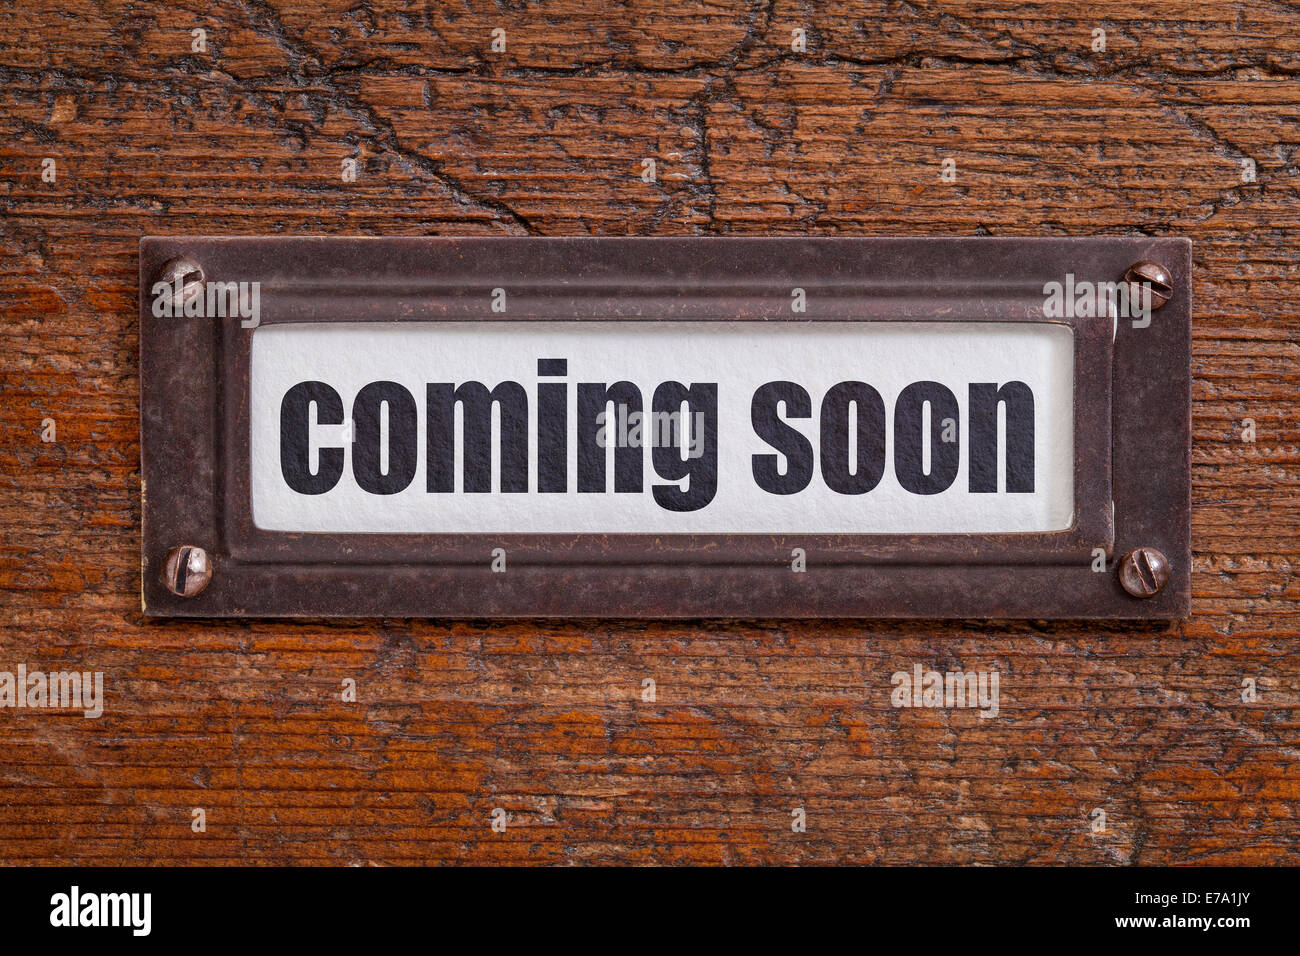 coming soon  - file cabinet label, bronze holder against grunge and scratched wood Stock Photo